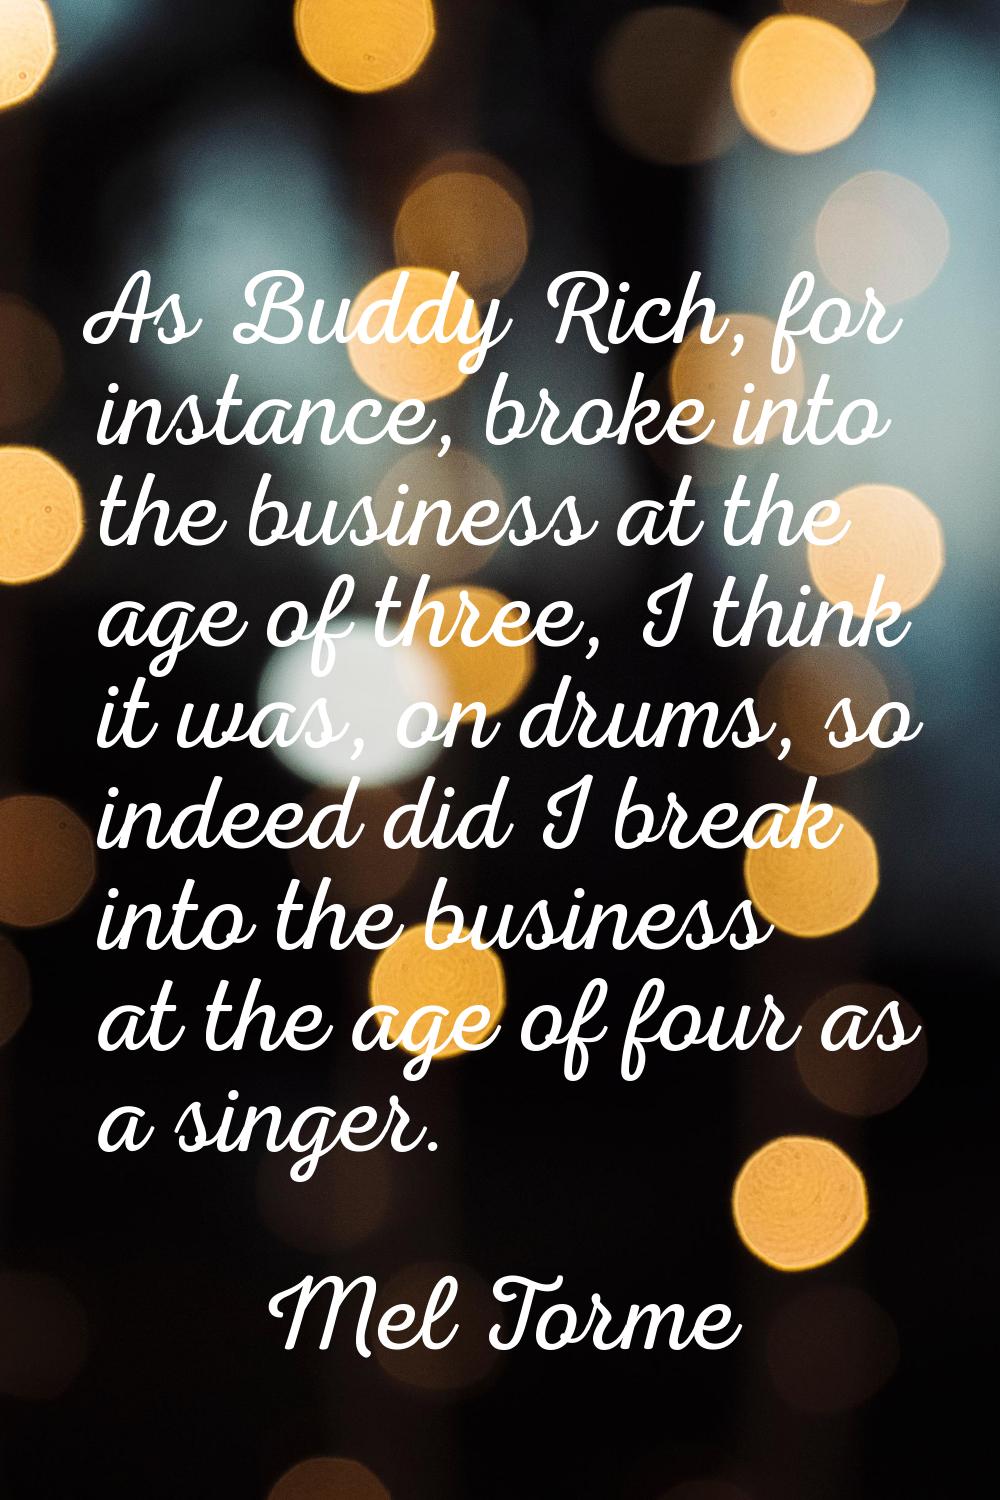 As Buddy Rich, for instance, broke into the business at the age of three, I think it was, on drums,